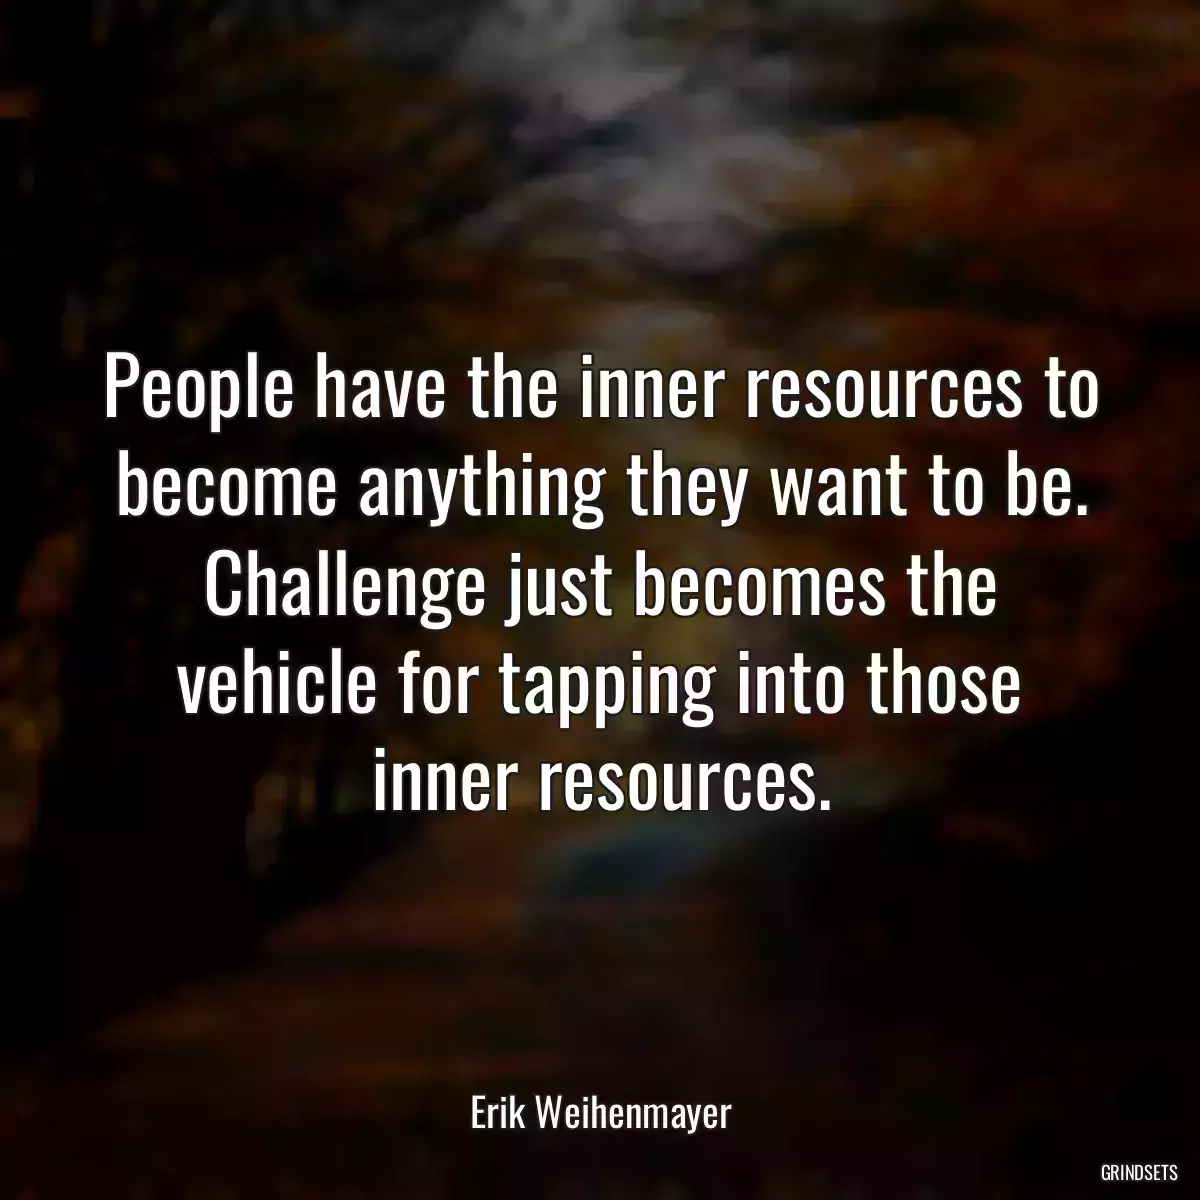 People have the inner resources to become anything they want to be. Challenge just becomes the vehicle for tapping into those inner resources.